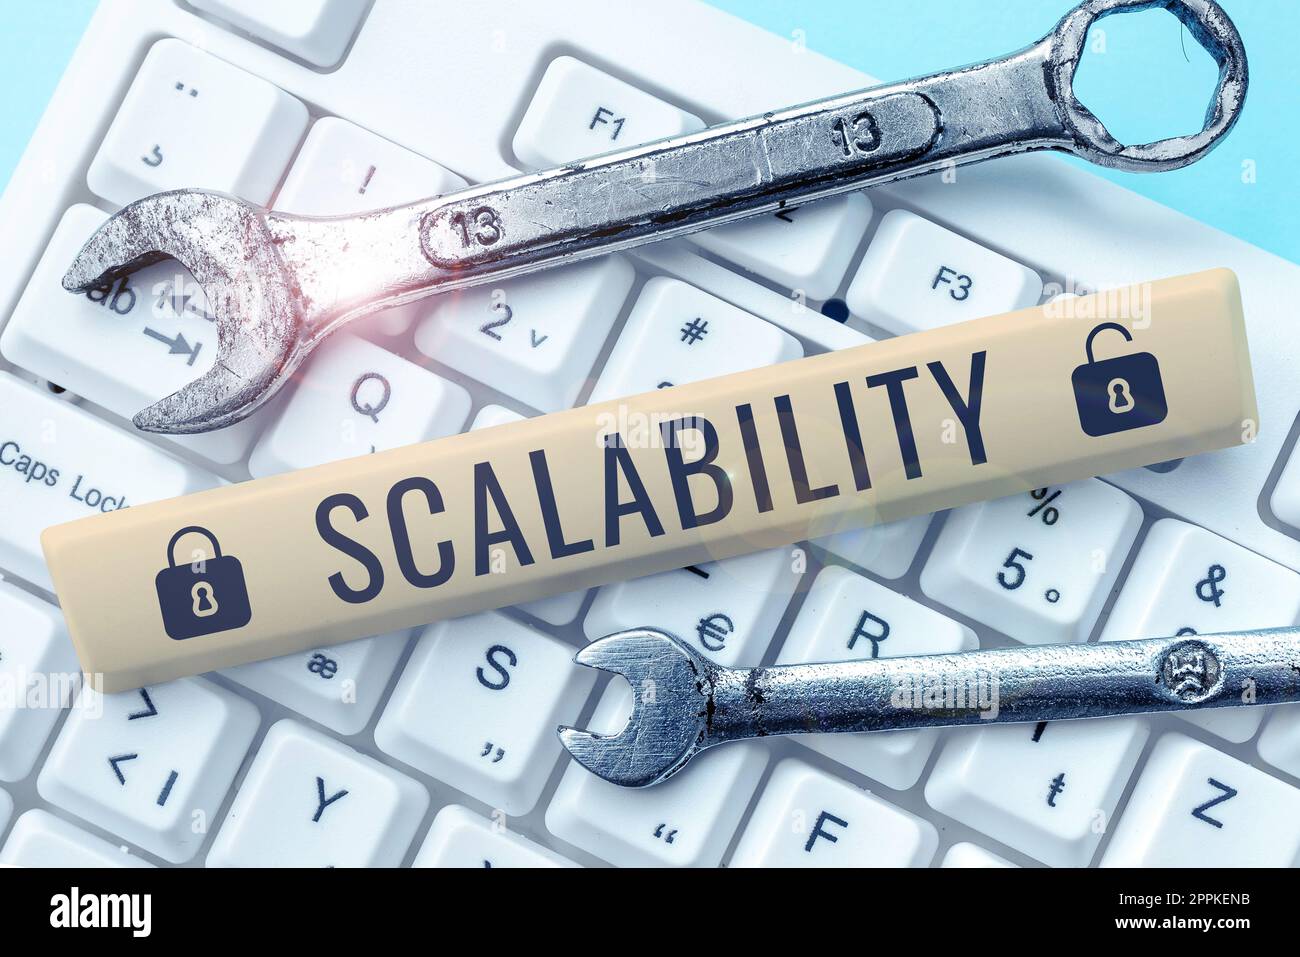 Writing displaying text Scalability. Conceptual photo capable of being easily expanded or upgraded on demand Stock Photo